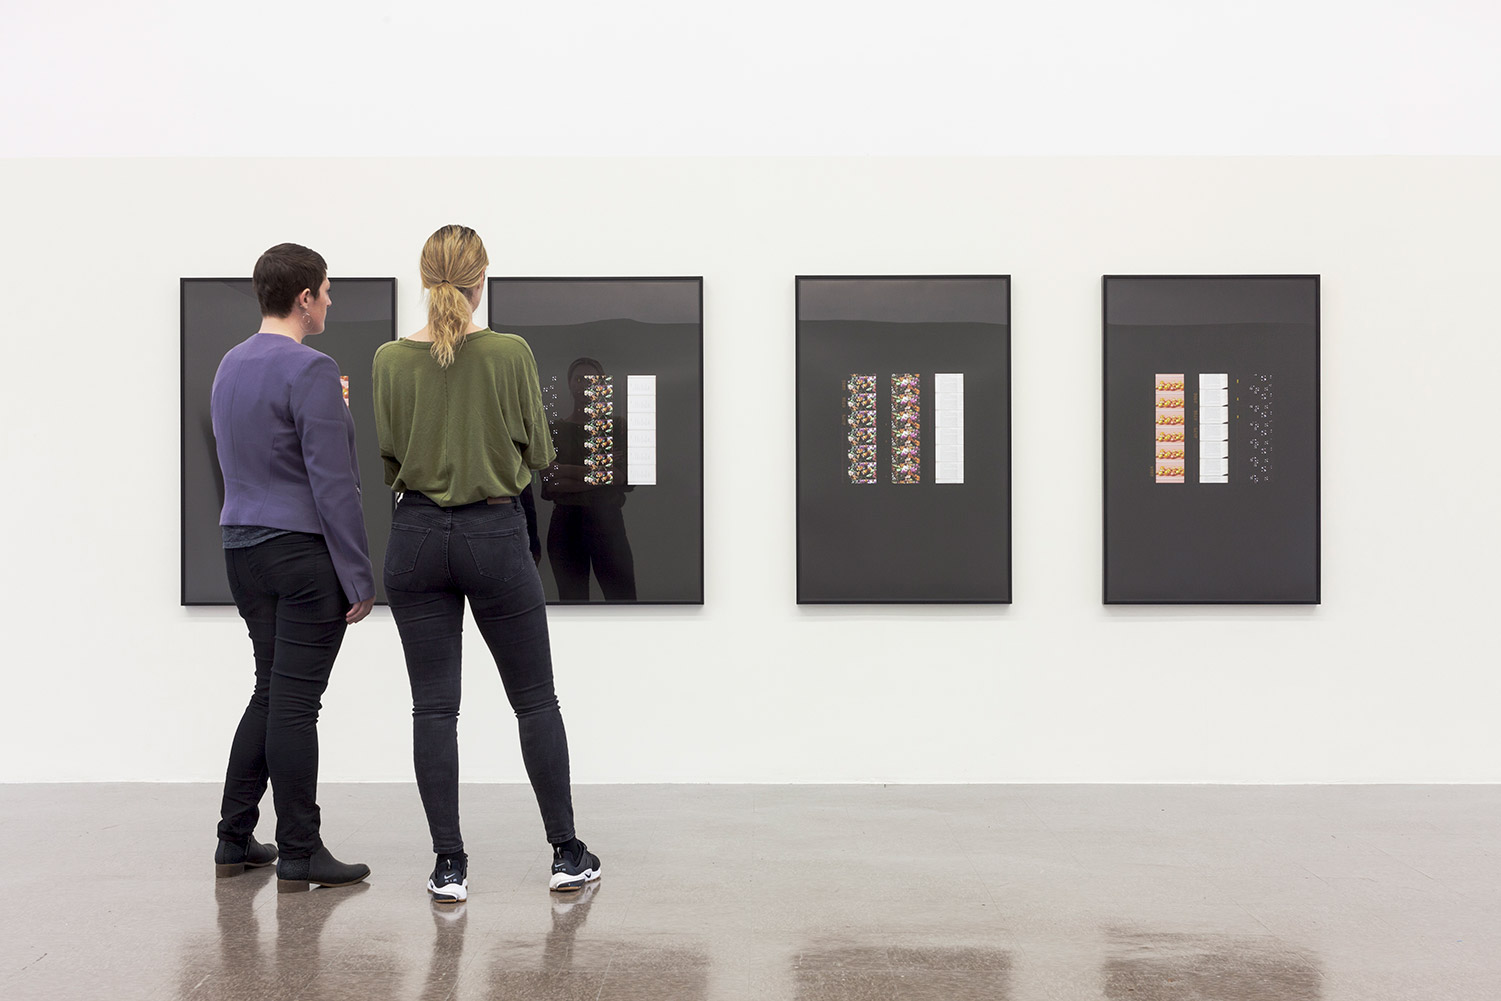 Visitors stand in front of four prints, each with three columns on a black background.